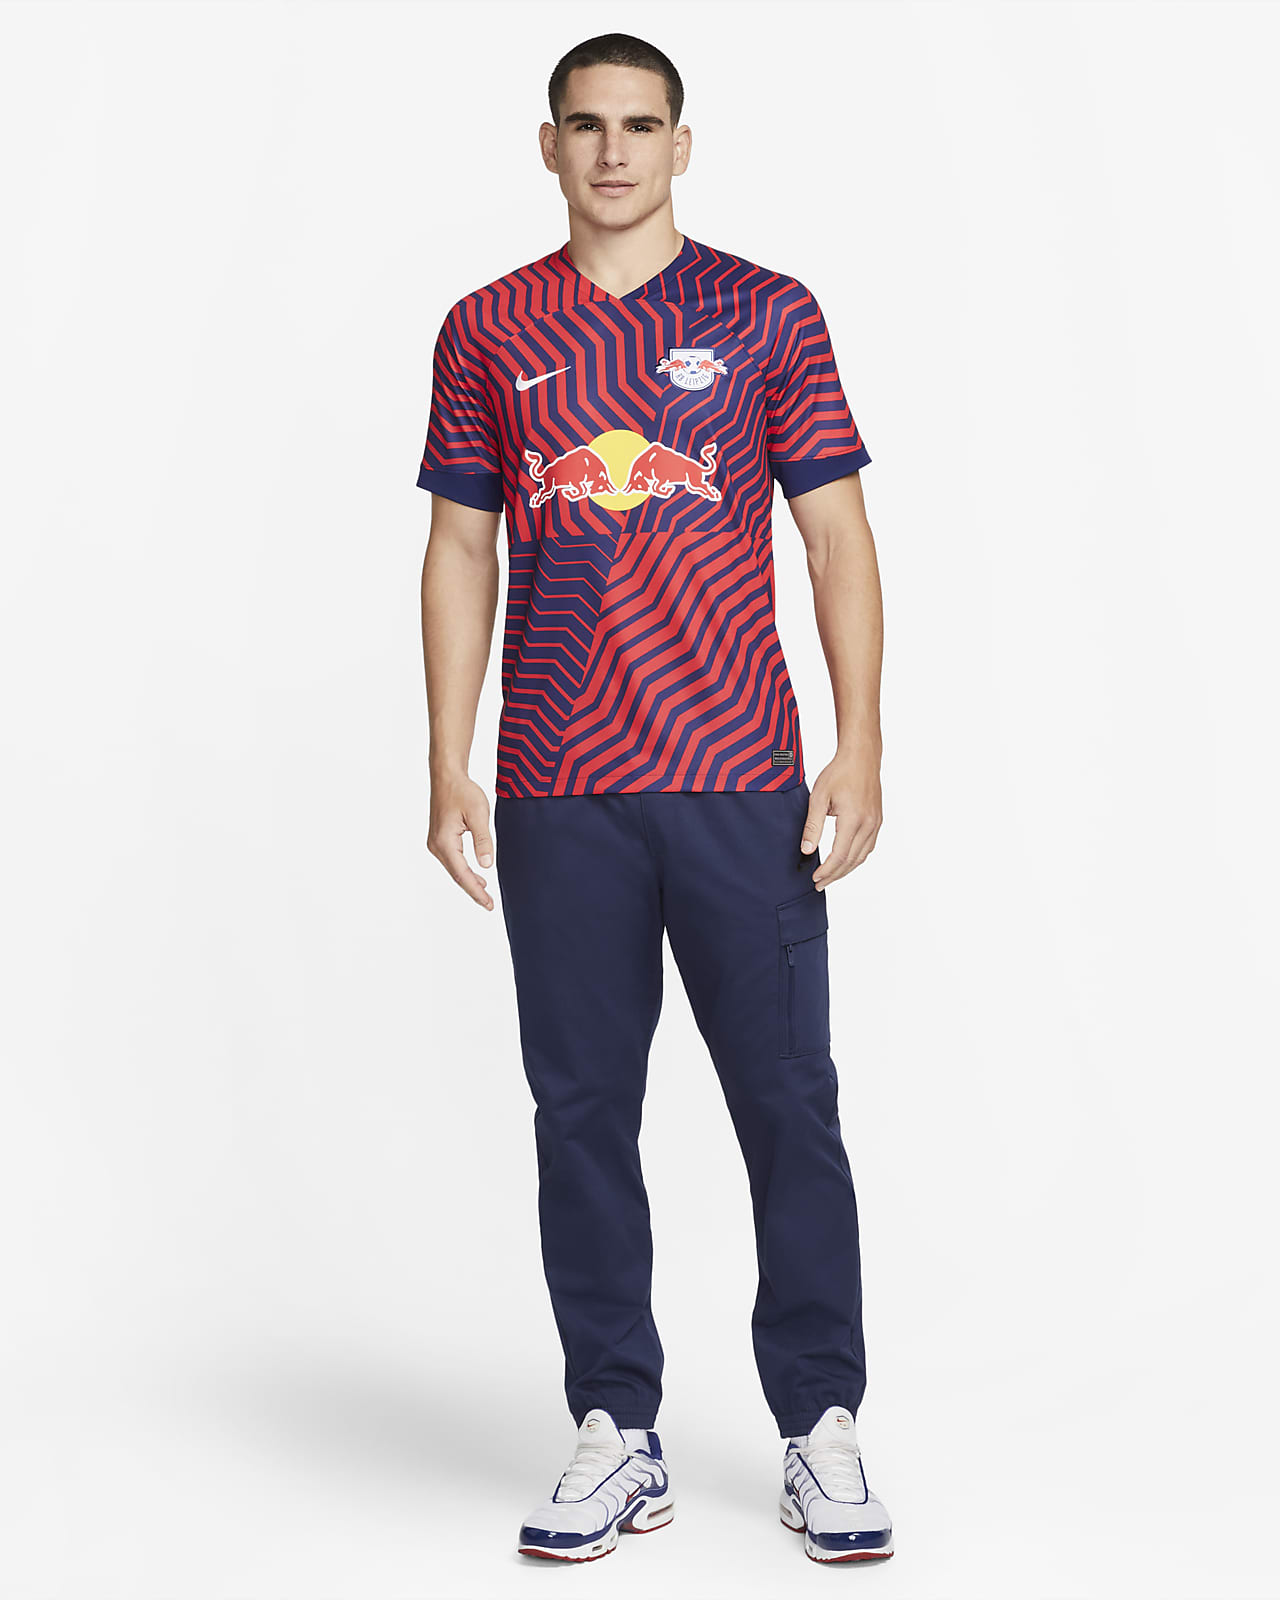 Maillots Football Homme  Nike Maillot Extérieur Red Bull Leipzig